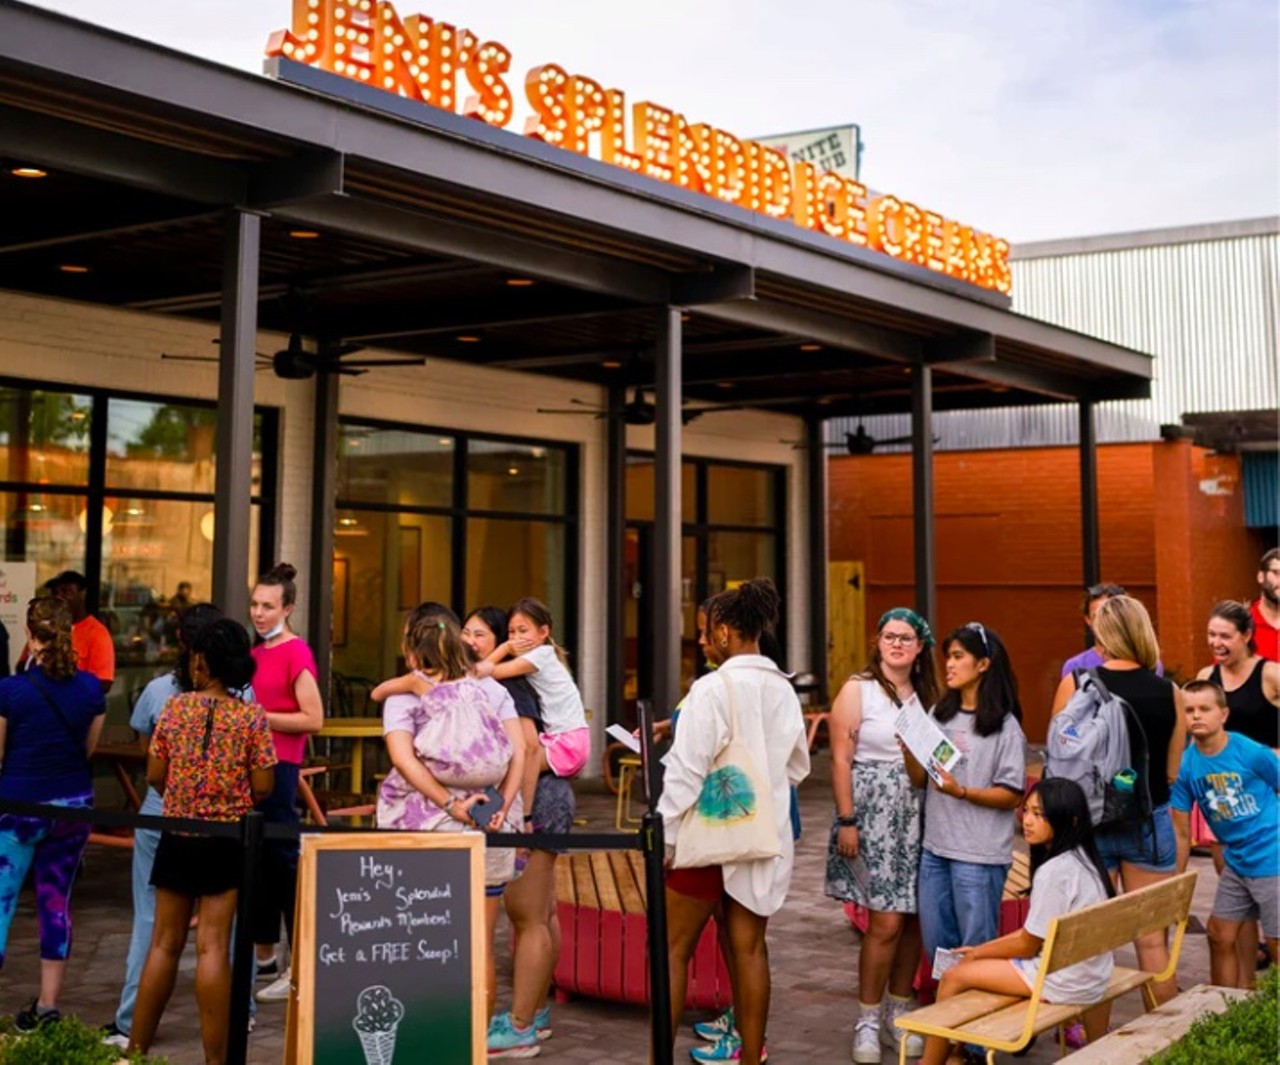 Jeni's Splendid Scoop Shop
510 N. Orlando Ave., Winter Park
Find all the fantastic flavors put out by the iconic ice cream brand in its very own brand-new scoop shop in Winter Park.